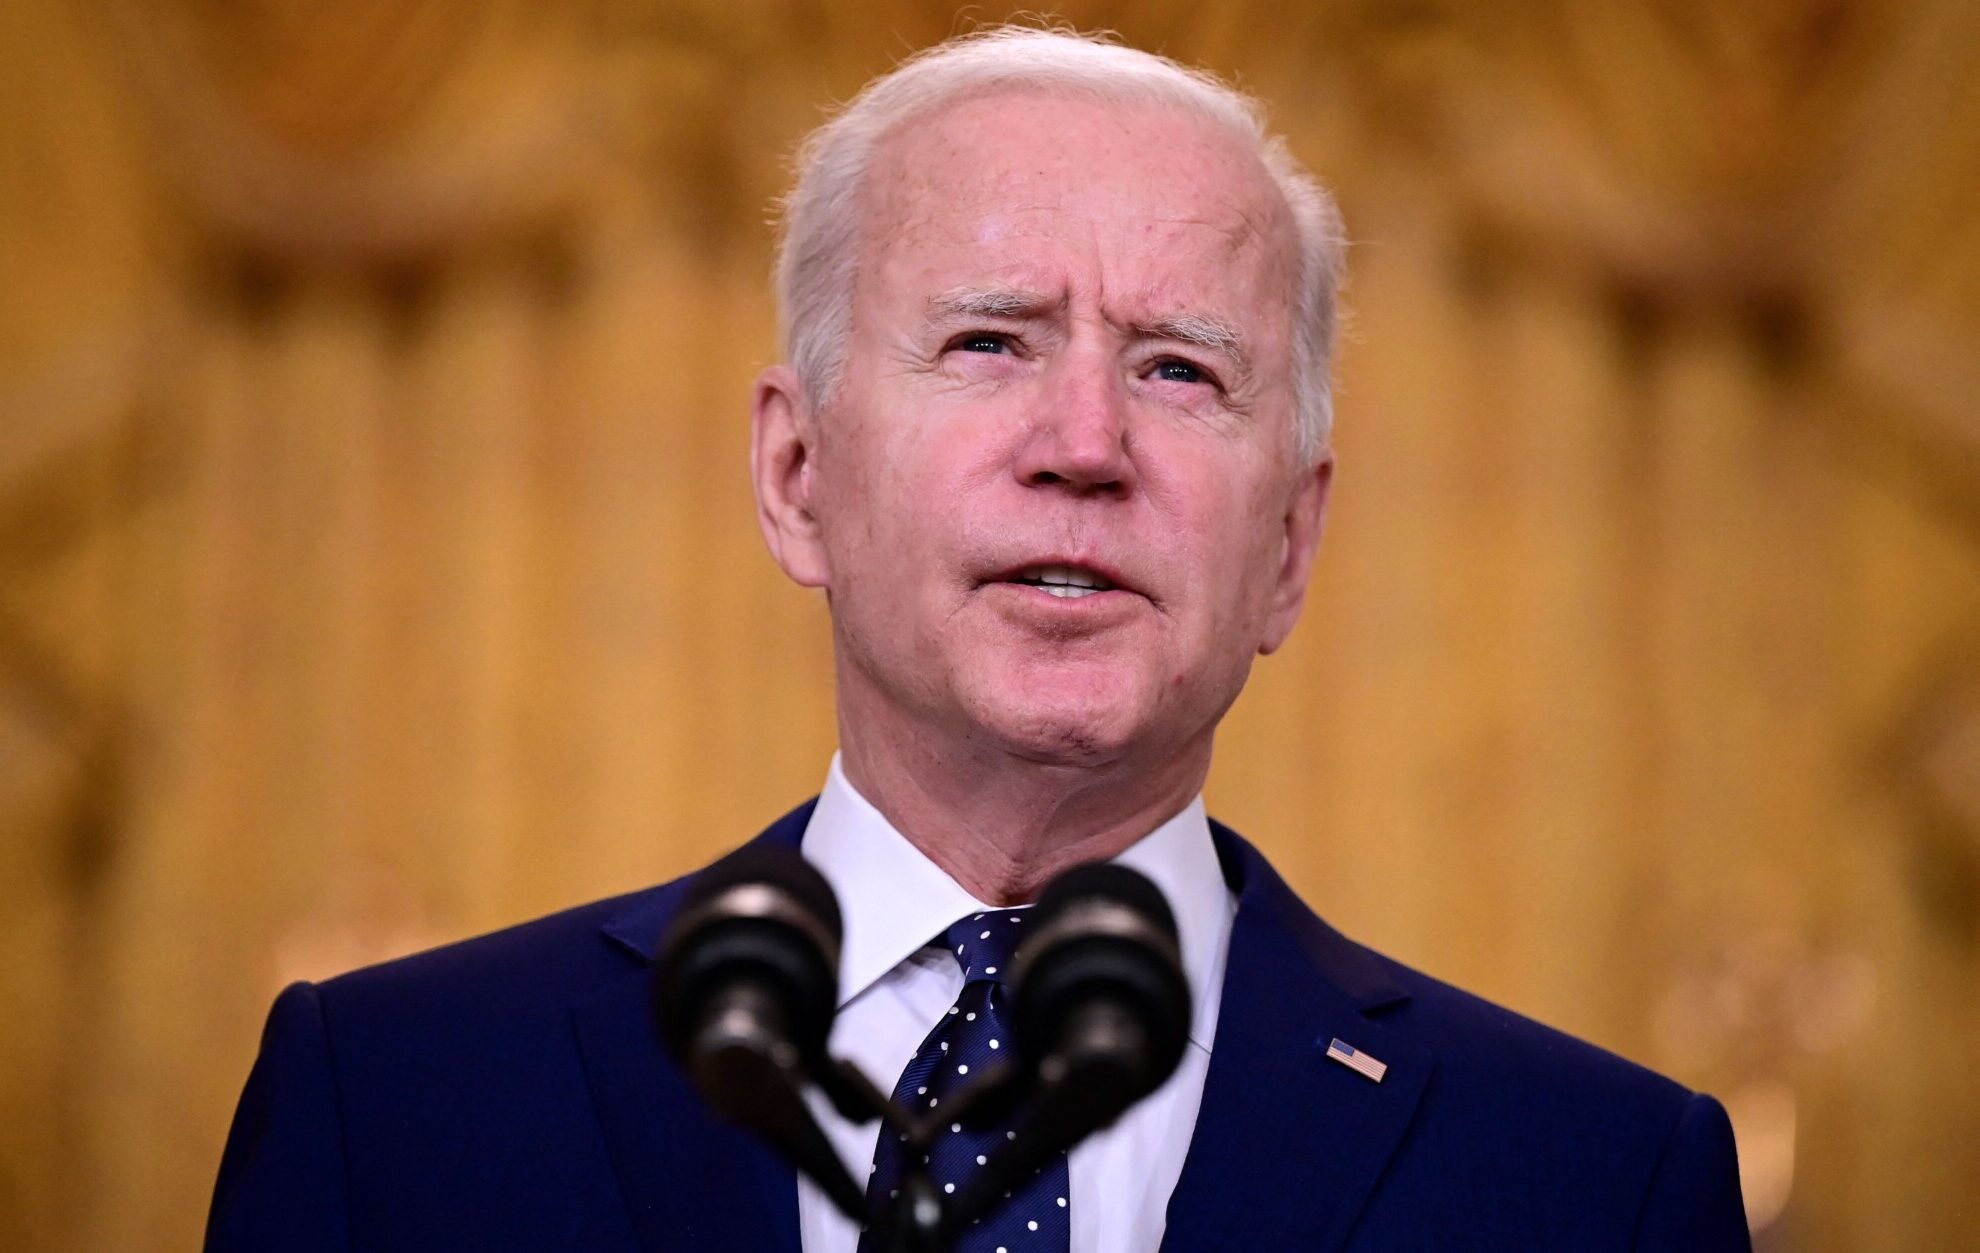 Biden Plans to Double Size of IRS, Catch Tax Evasion